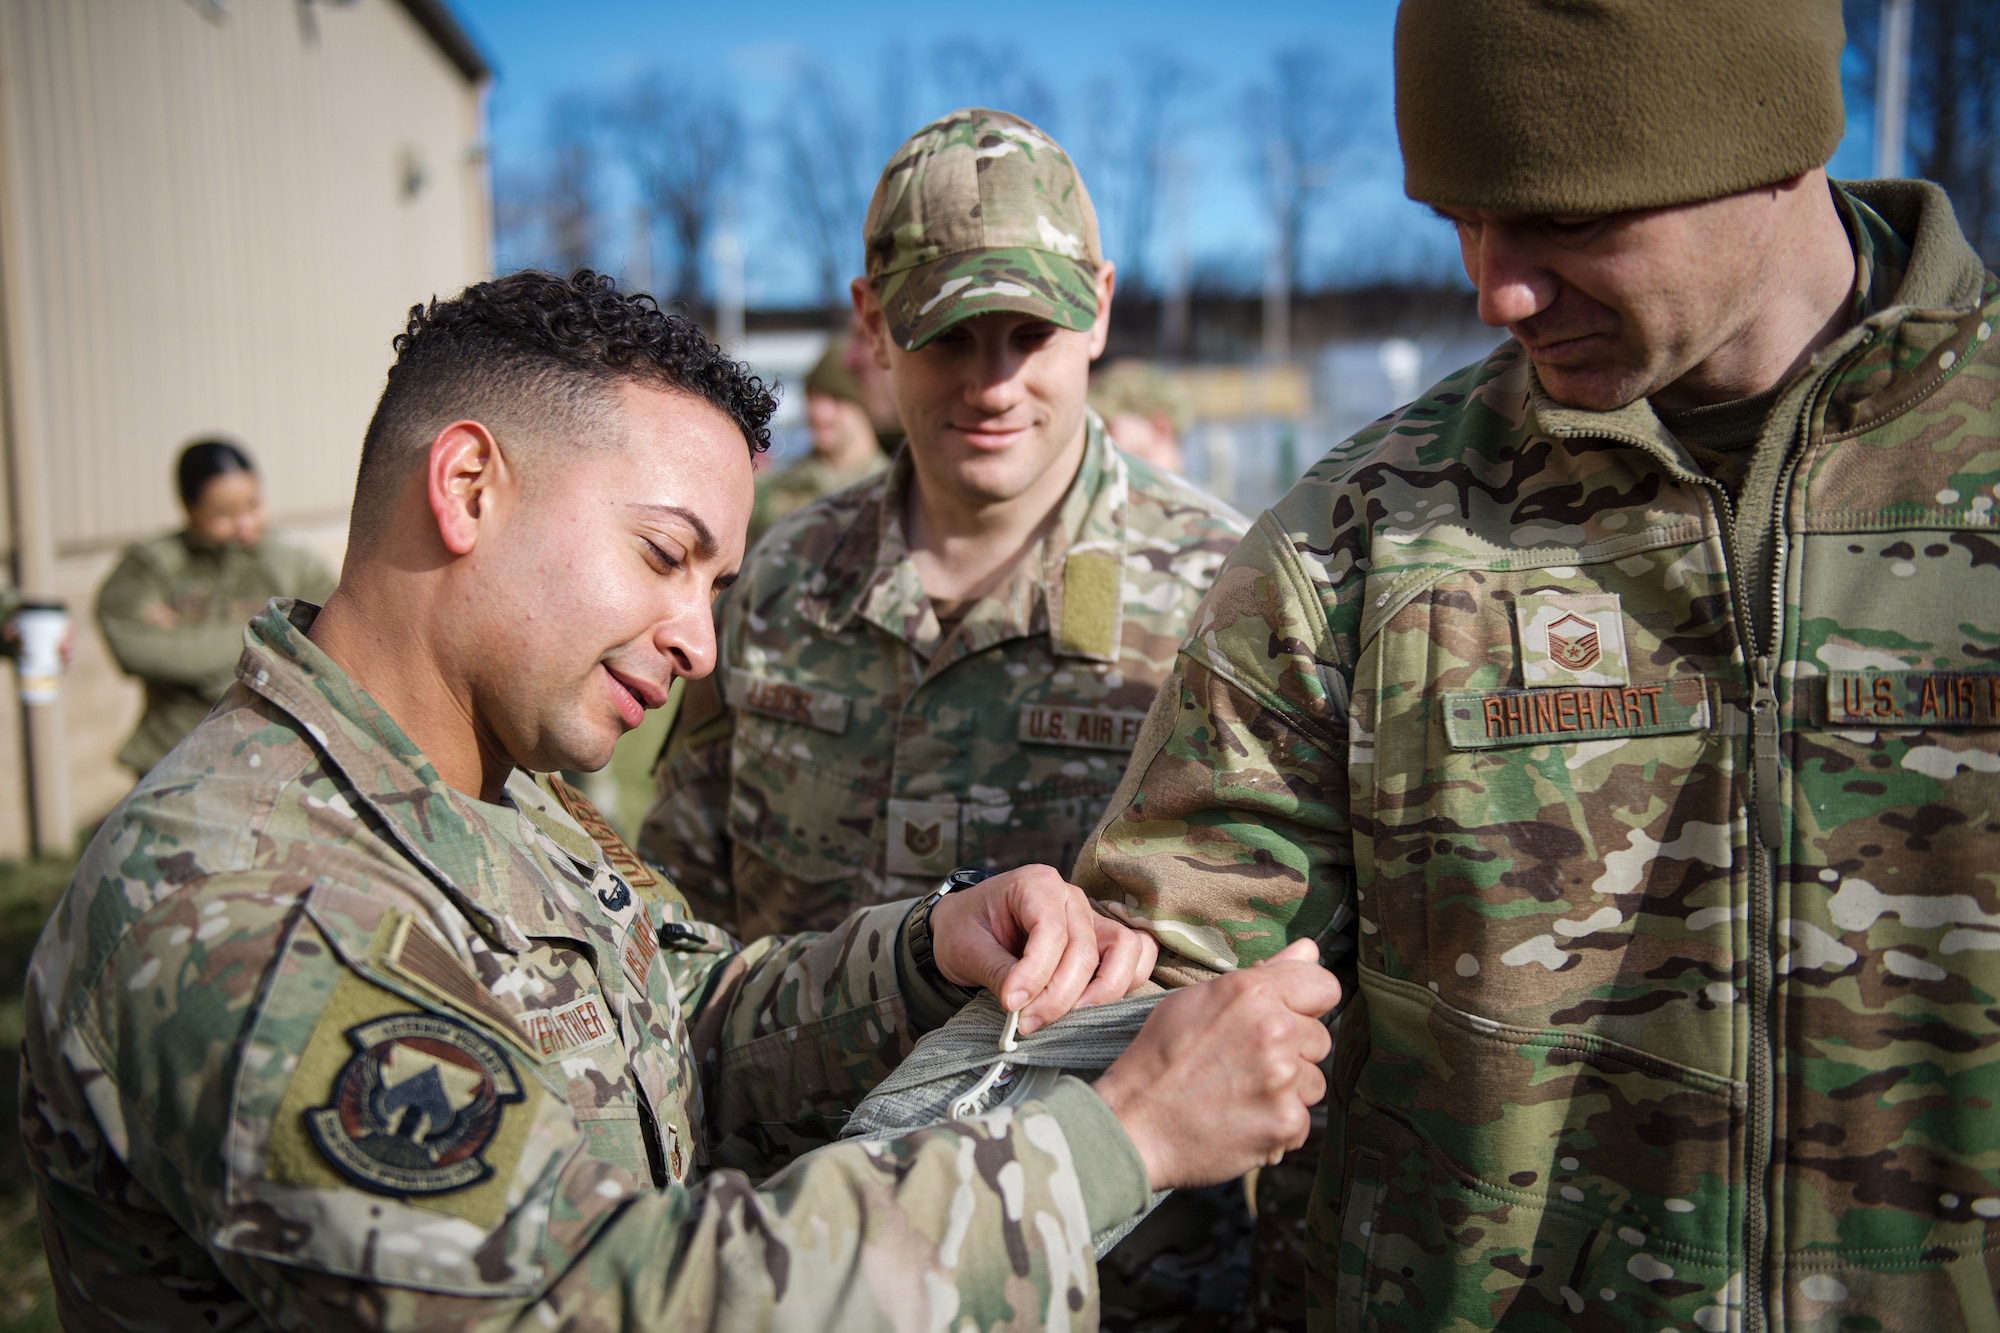 U.S. Air Force Master. Sgt. Kenneth Rivera-Ithier, left, a Deployed Aircraft Ground Response Element member with the 193rd Special Operations Security Forces Squadron, teaches Airmen how to dress wounds during a Tactical Combat Casualty Care course Jan. 8, 2023, in Middletown, Pennsylvania. Rivera-Ithier used his military training to help save the life of a family member over the holidays.